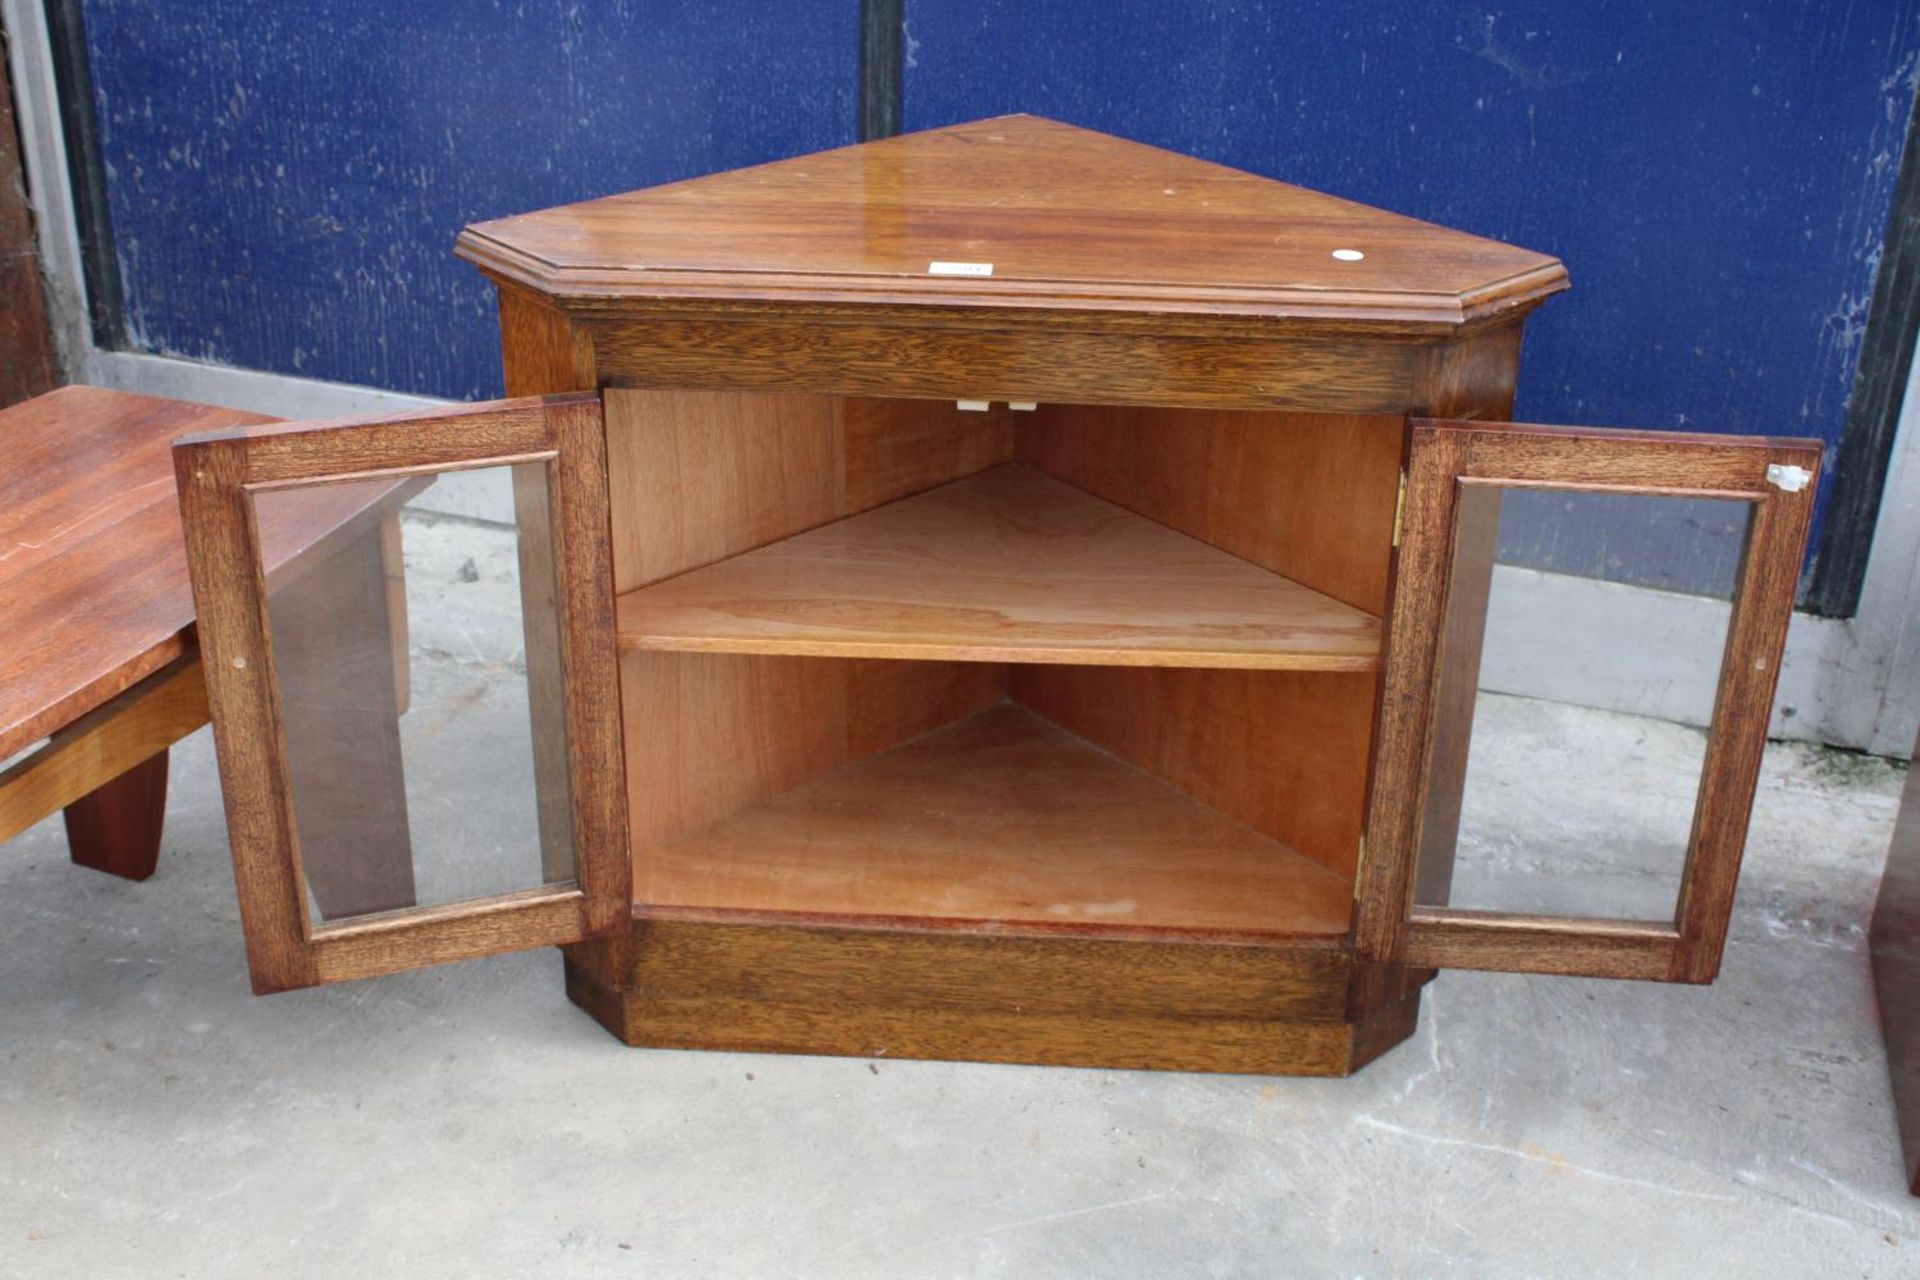 A GORDON WARR CONTRASTING HARDWOOD COFFEE TABLE AND AN OAK CORNER CABINET - Image 5 of 8